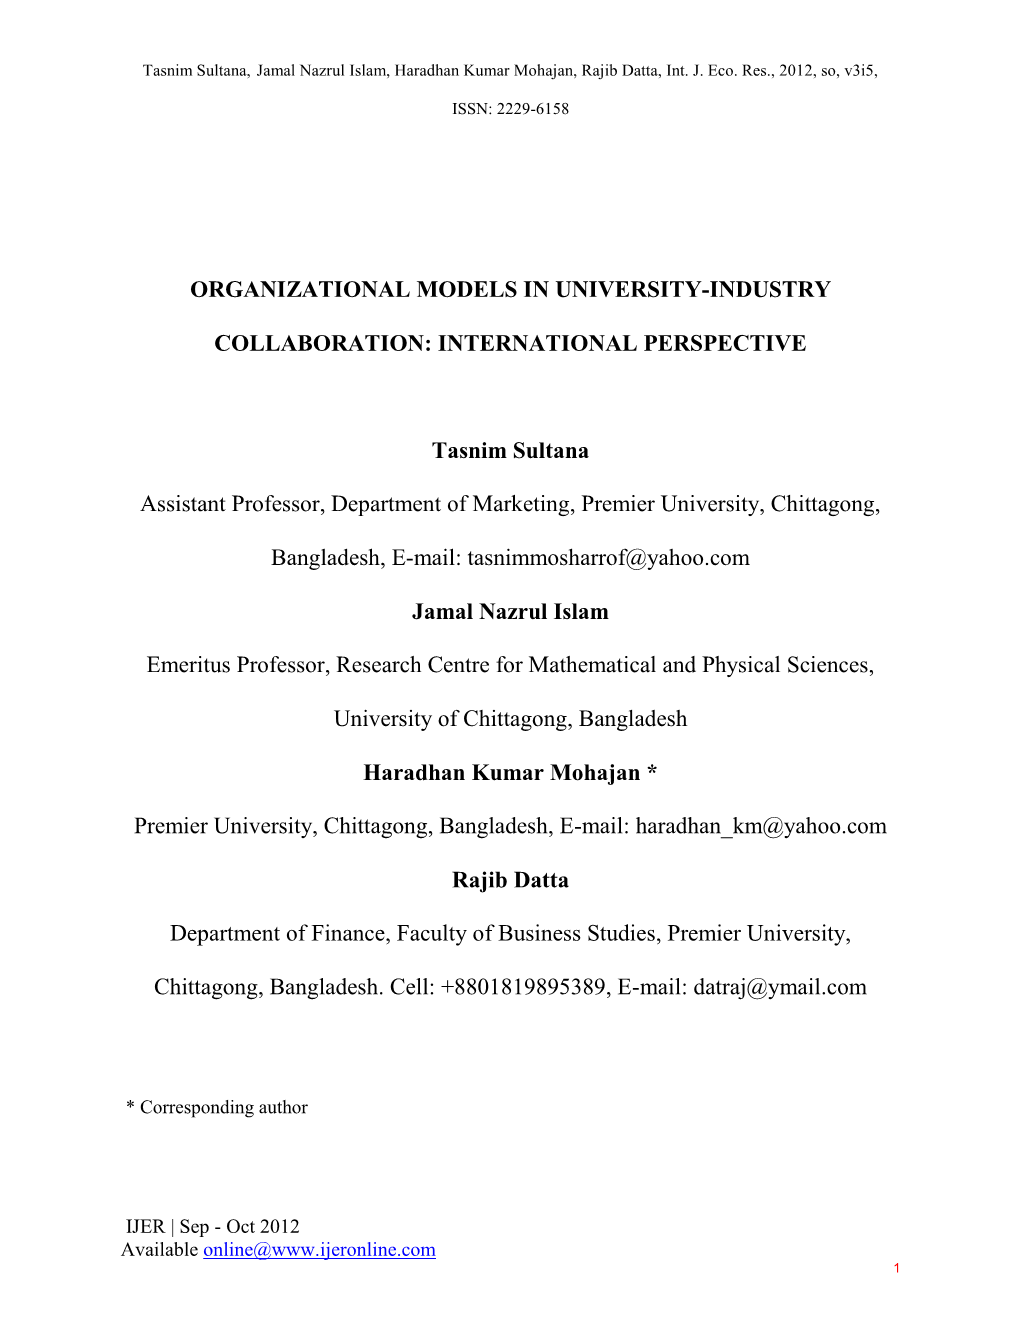 Organizational Models in University-Industry Collaboration: International Perspective